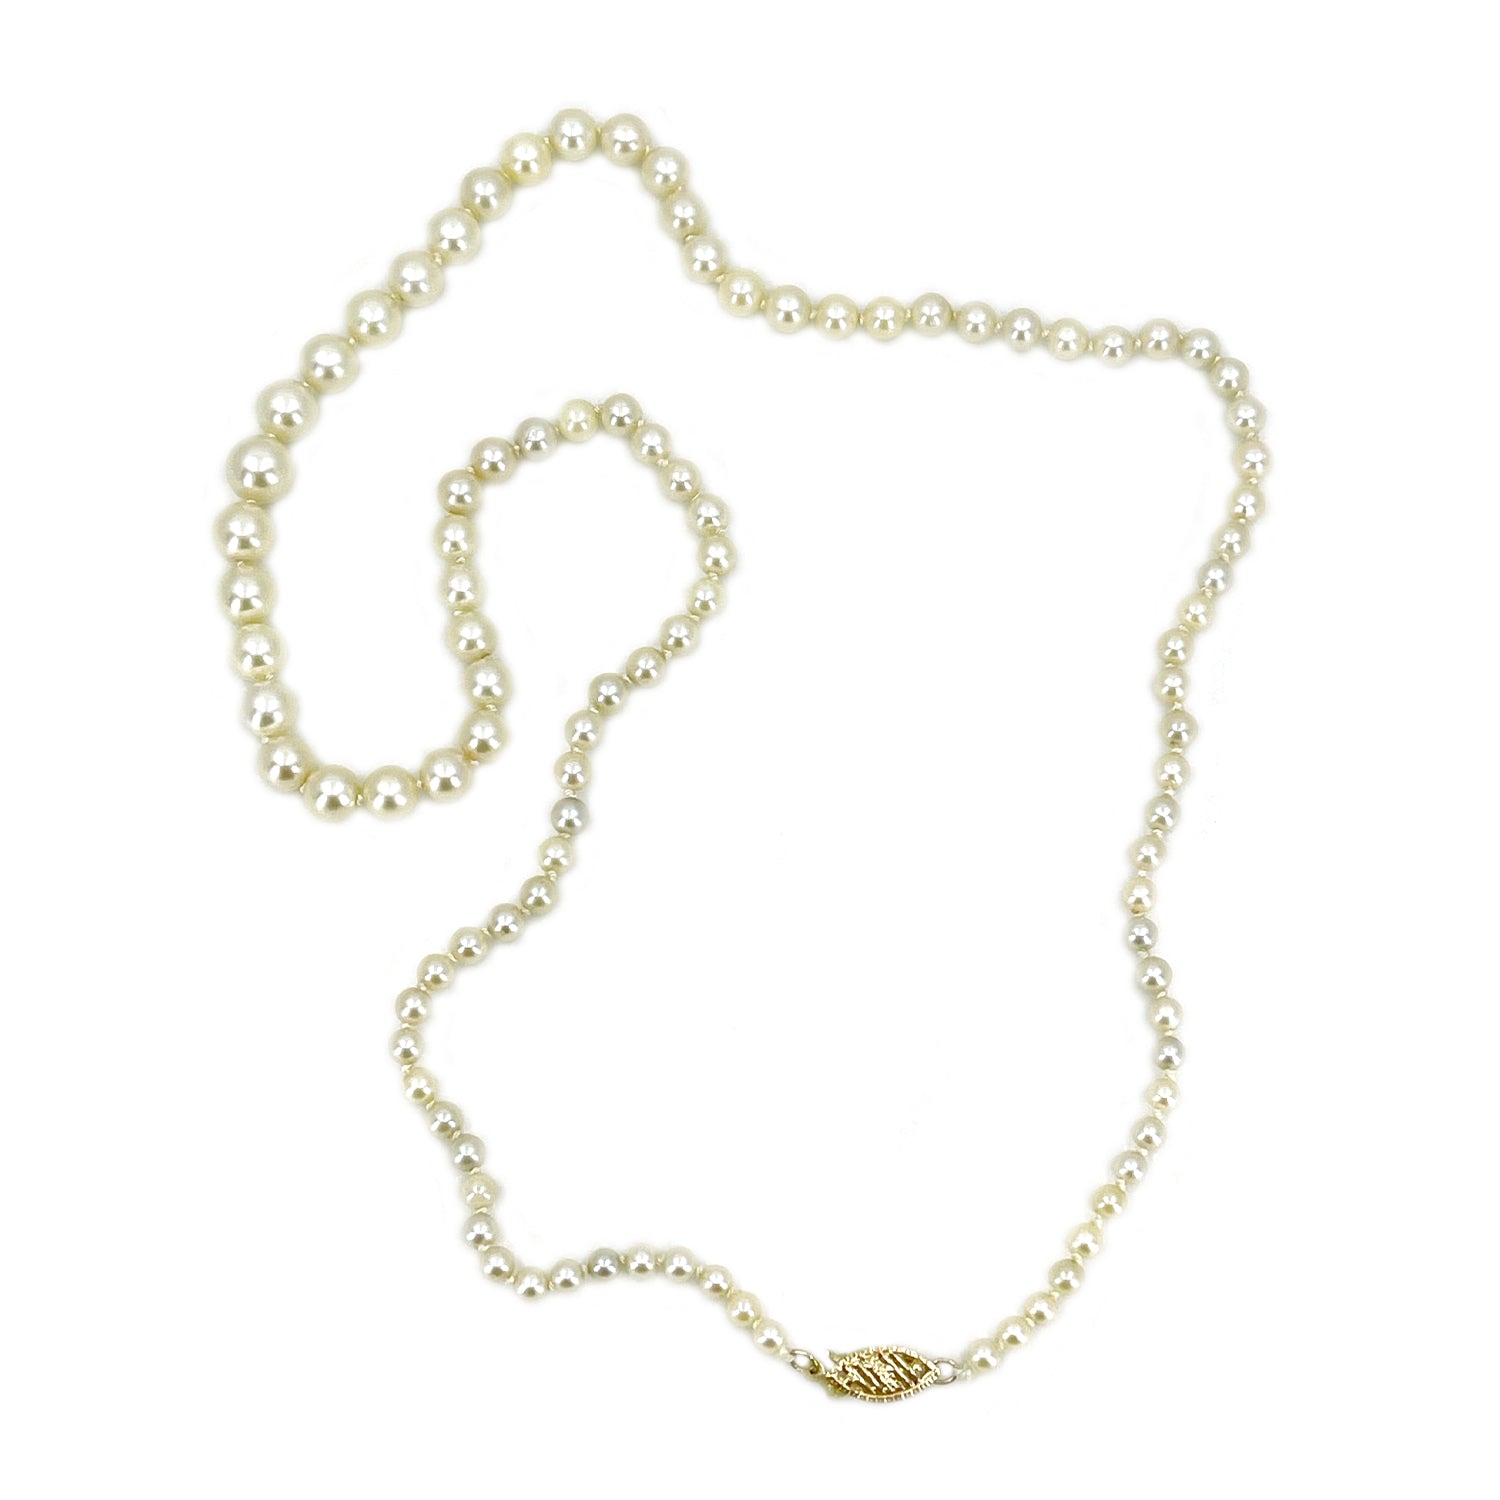 Graduated Estate Japanese Cultured Saltwater Akoya Pearl Vintage Necklace - 14K Yellow Gold 20.50 Inch